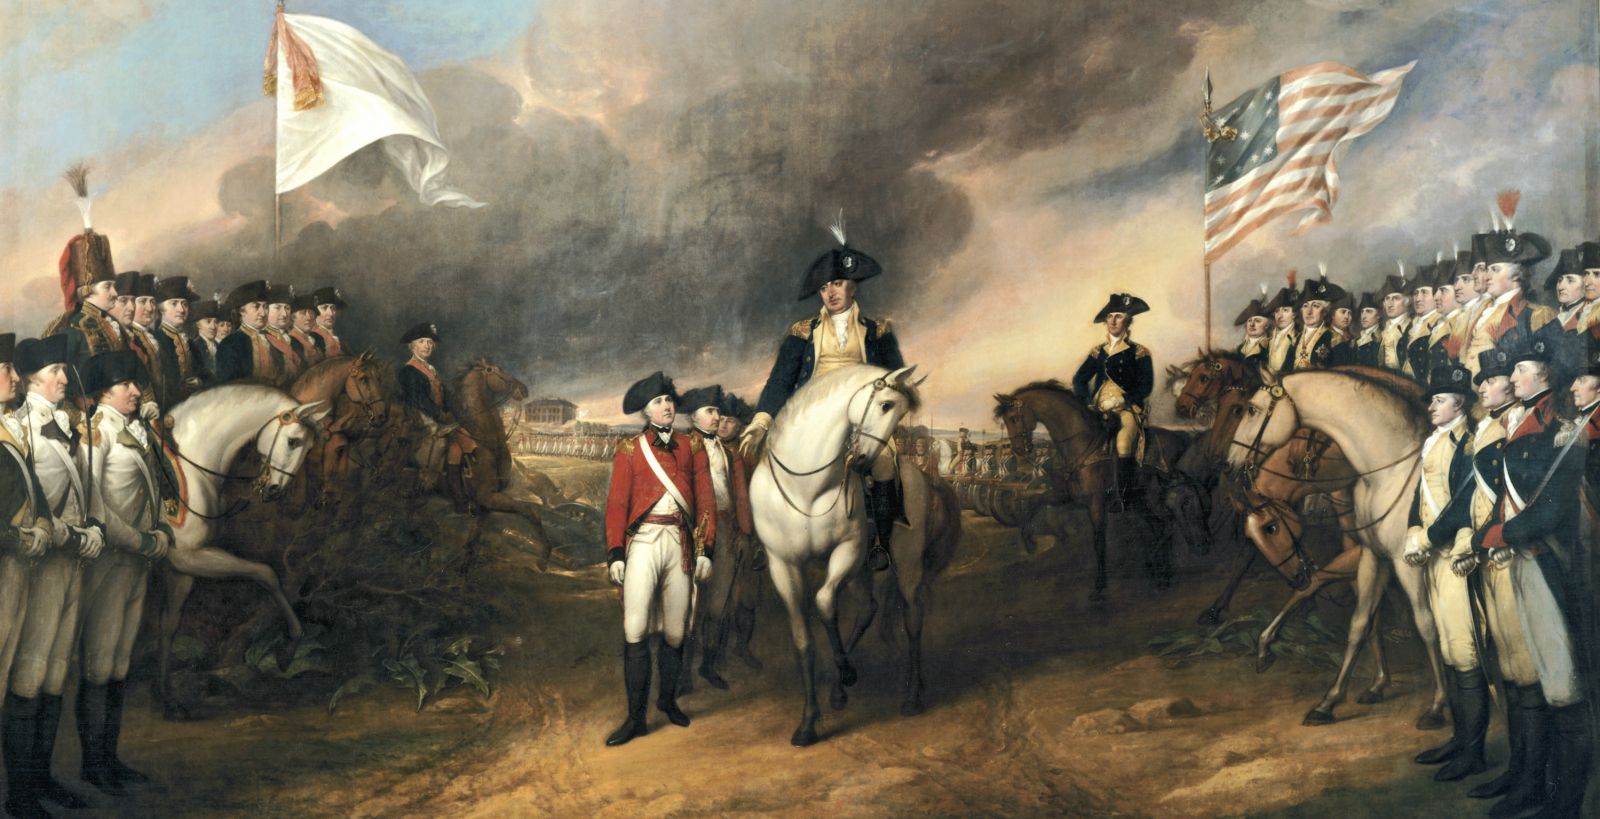 The naval Battle of the Chespeake kept reinforcements and suppies from British General Charles Cornwallis, who was forced to surrended afterwards at Yorktown. John Trumbull painted this mural for the U.S. Capitol showing Cronwallis (center), even though he was not himself present at the surrender).